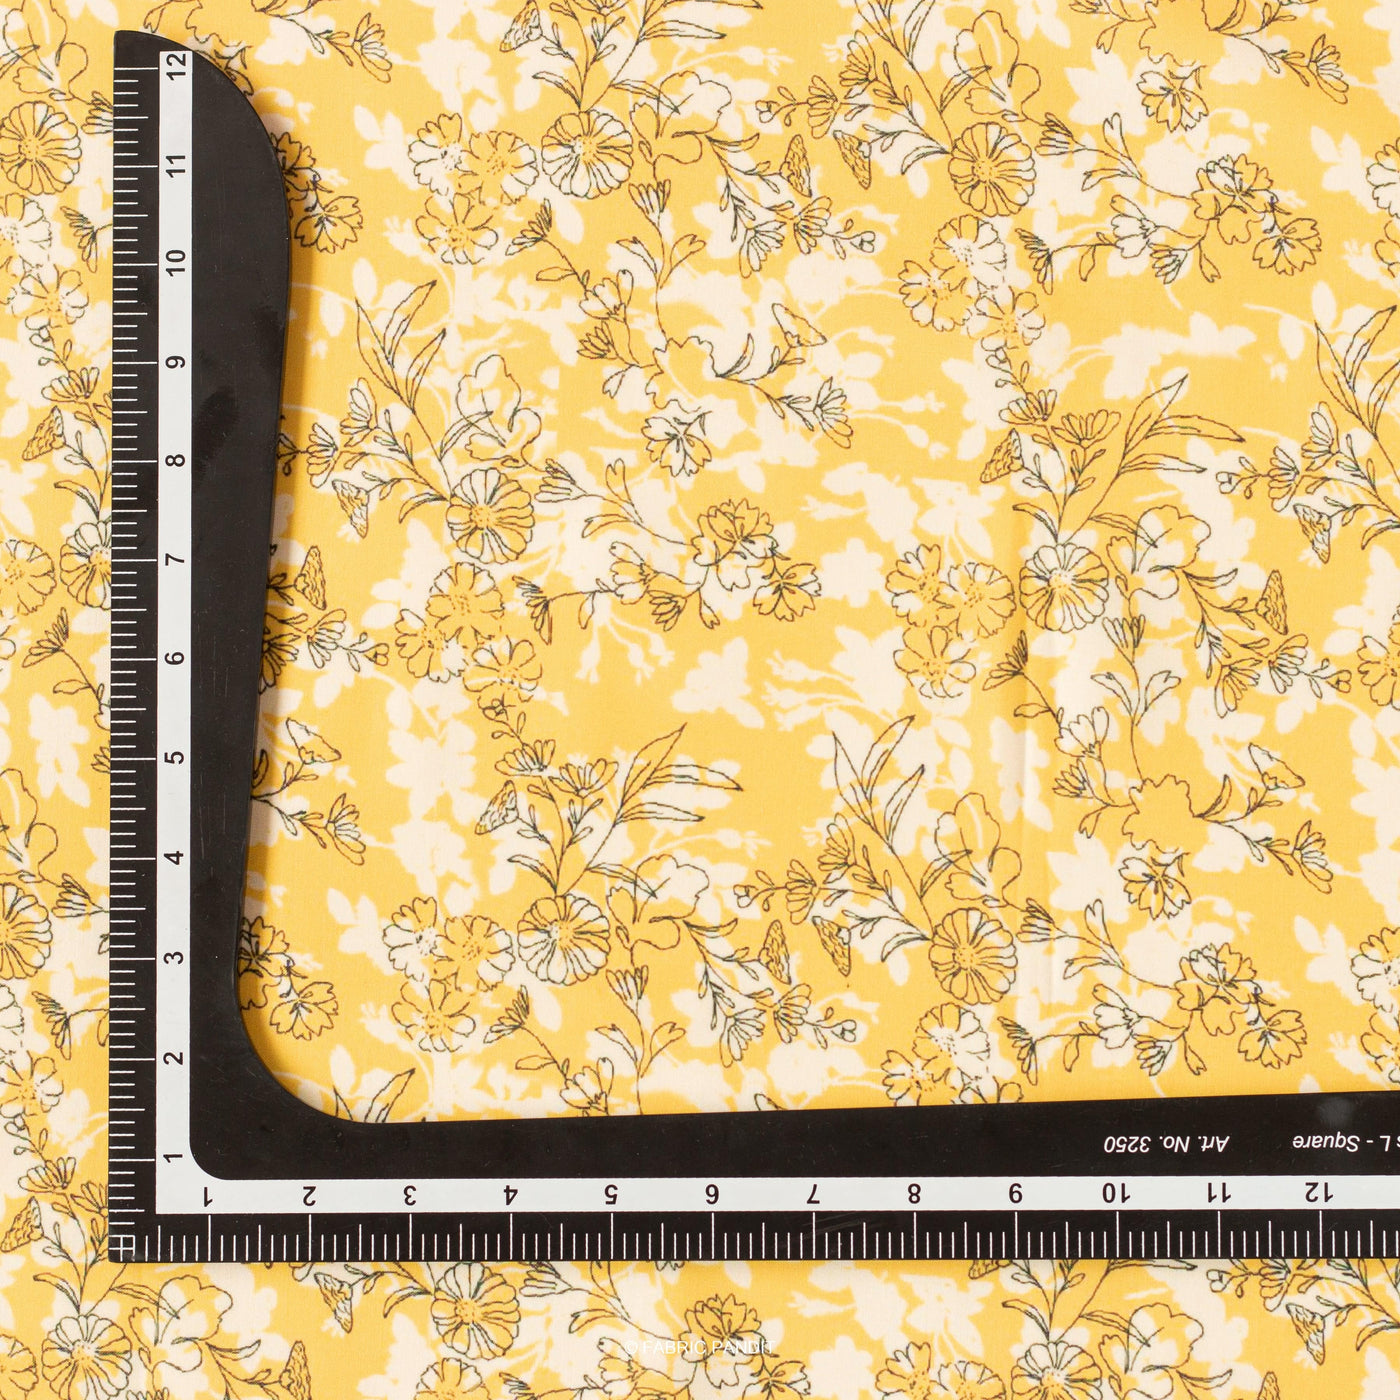 Fabric Pandit Fabric Bright Yellow All Over Floral Vines Digital Printed Poly Blend Cambric Fabric (Width 43 Inches)